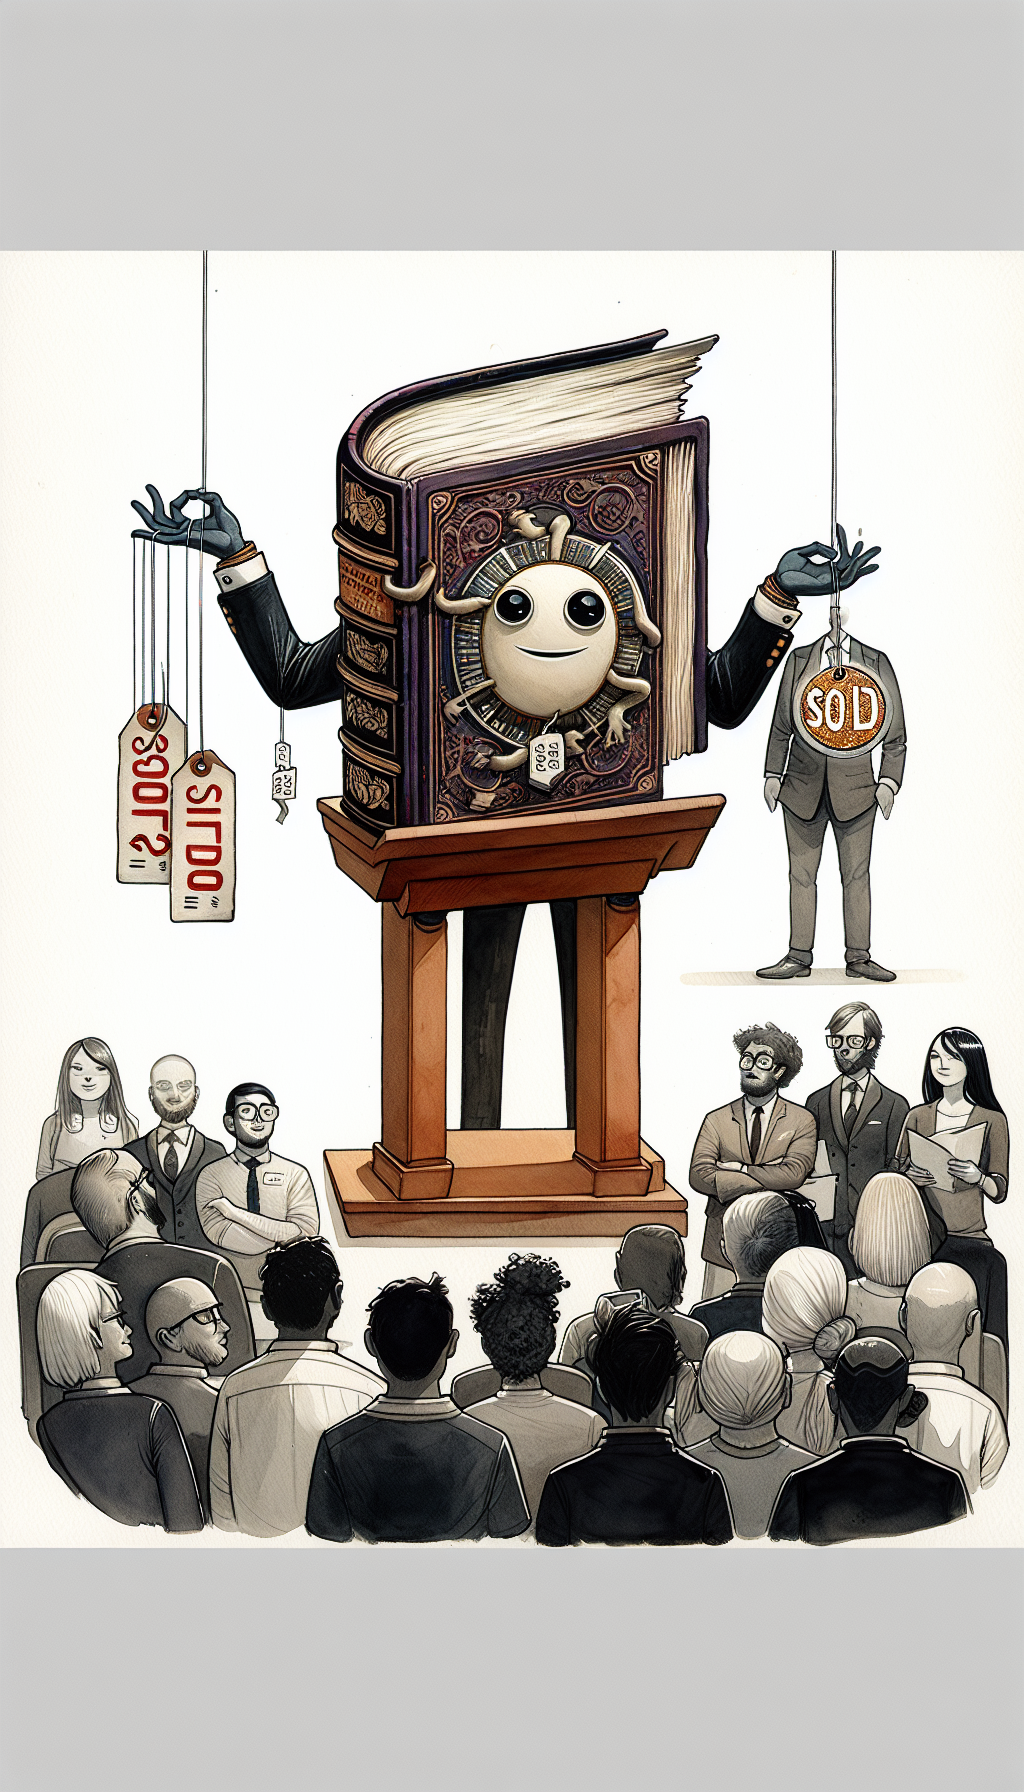 An anthropomorphic vintage book stands on a podium, auctioning itself to an eager crowd of eclectic characters, from antiquarians to hipster collectors. With price tags hanging from its pages and a gilded "SOLD" stamp shining on its cover, the illustration melds a classic watercolor style with modern line art, capturing the allure and value of antique books in the digital age.